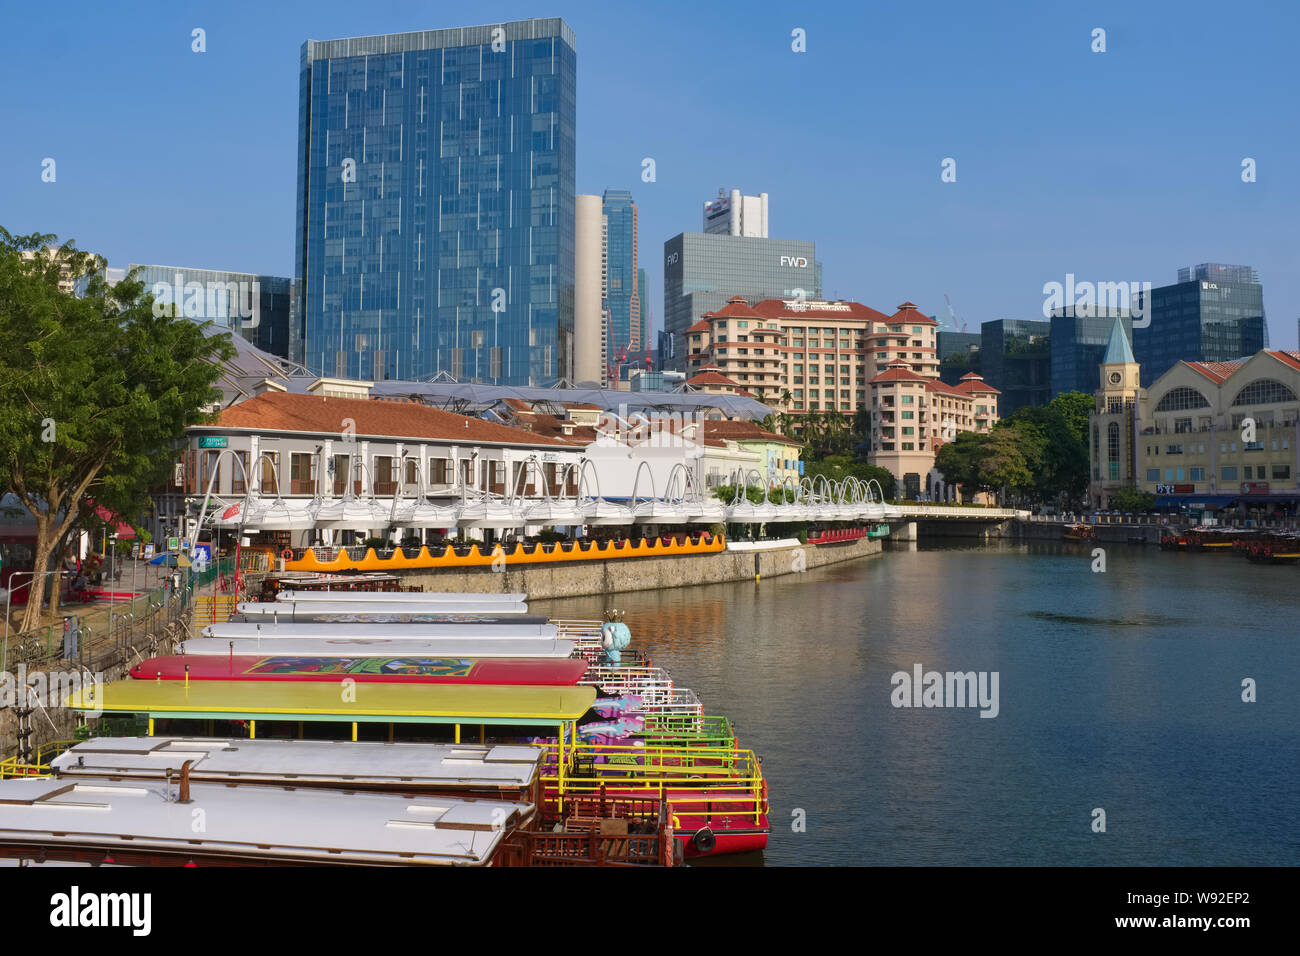 View from the northern end of Clarke Quay over the Singapore River, Riverside Point (b/g), Swissôtel Merchant Court Hotel (b/g) and excursion boats Stock Photo